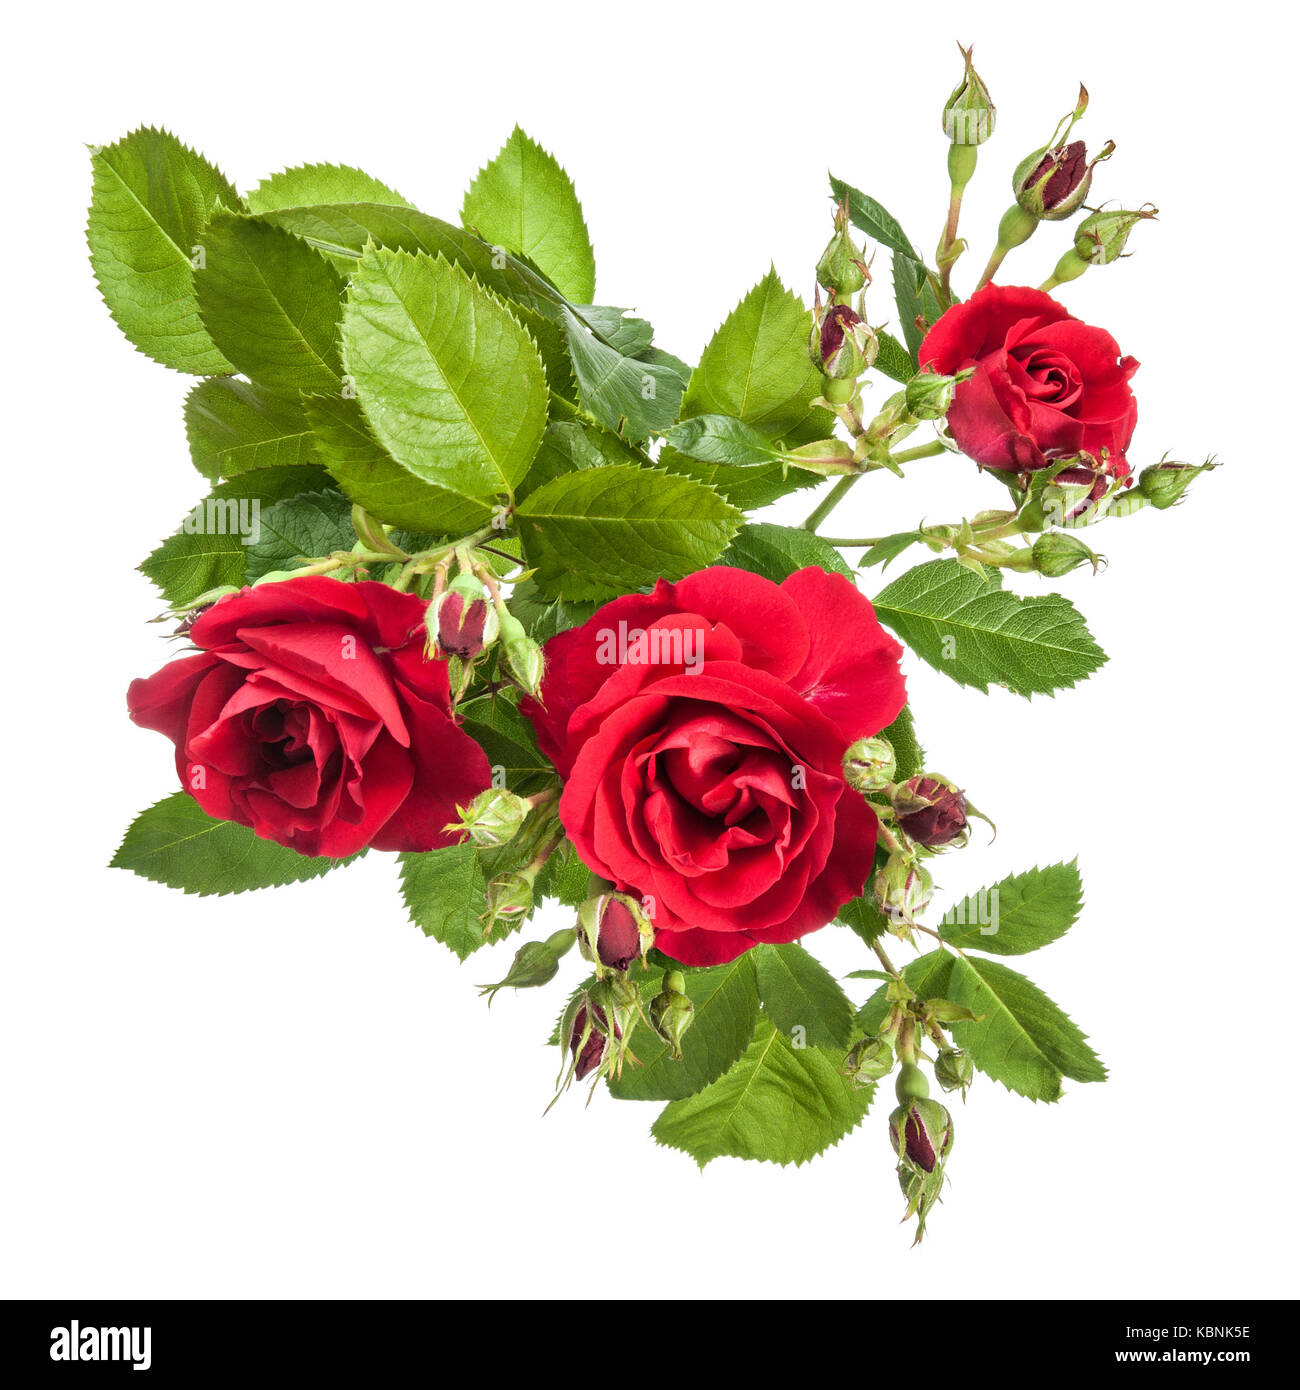 Flowers pattern with red rose Stock Photo - Alamy